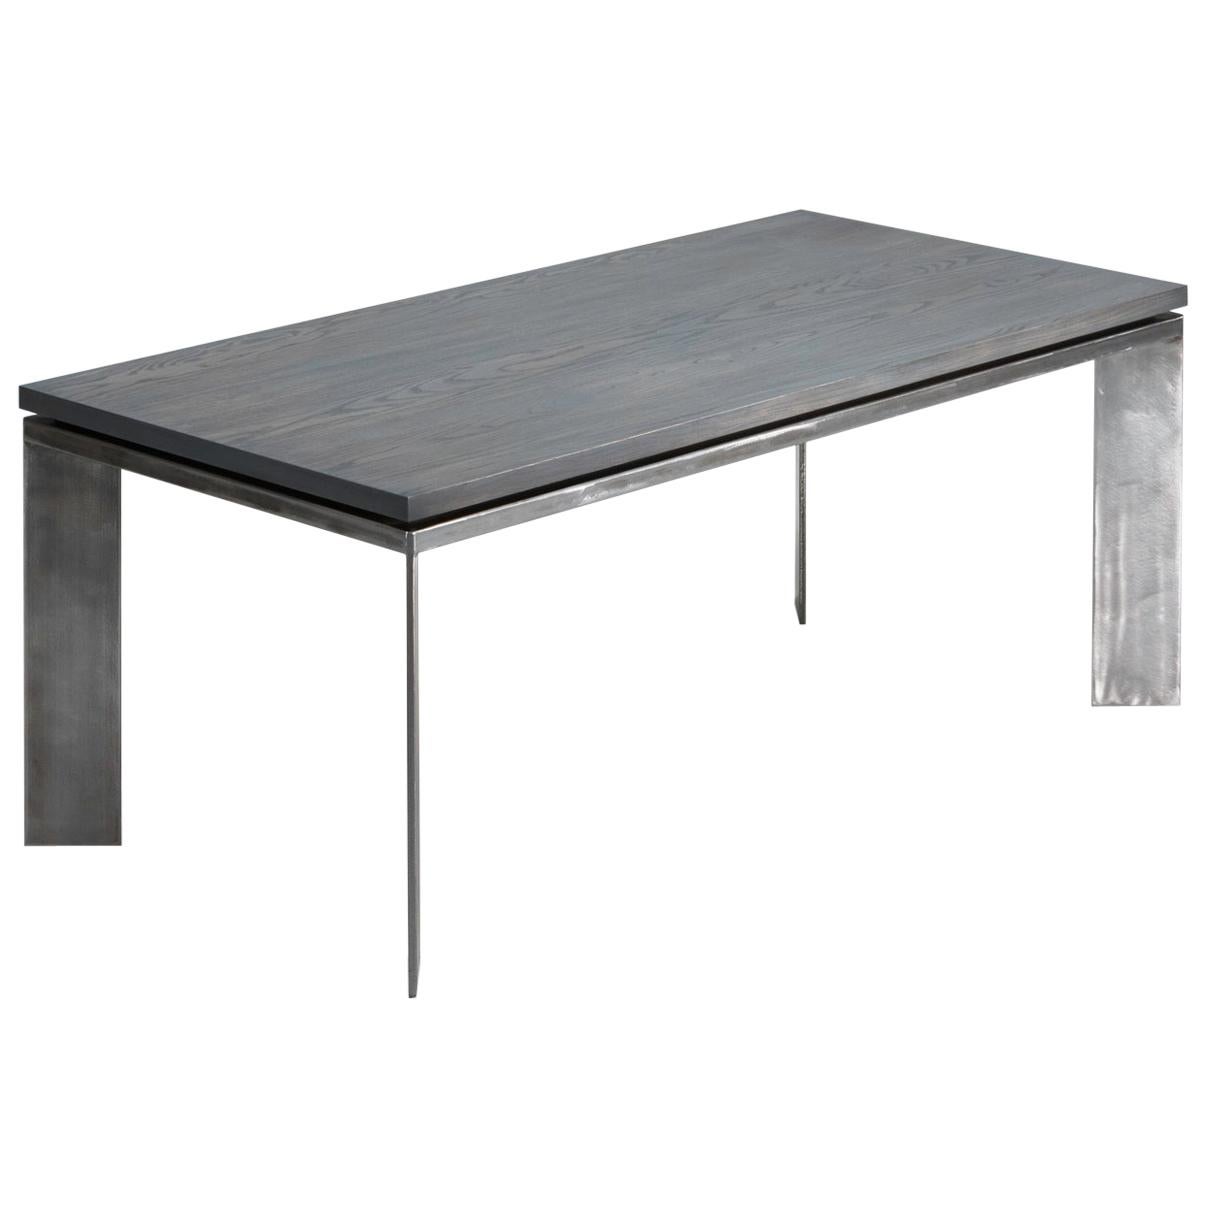 Slate Gray Ashwood Dining Table on Brushed Steel Base "Charlevoix Dining Table" For Sale